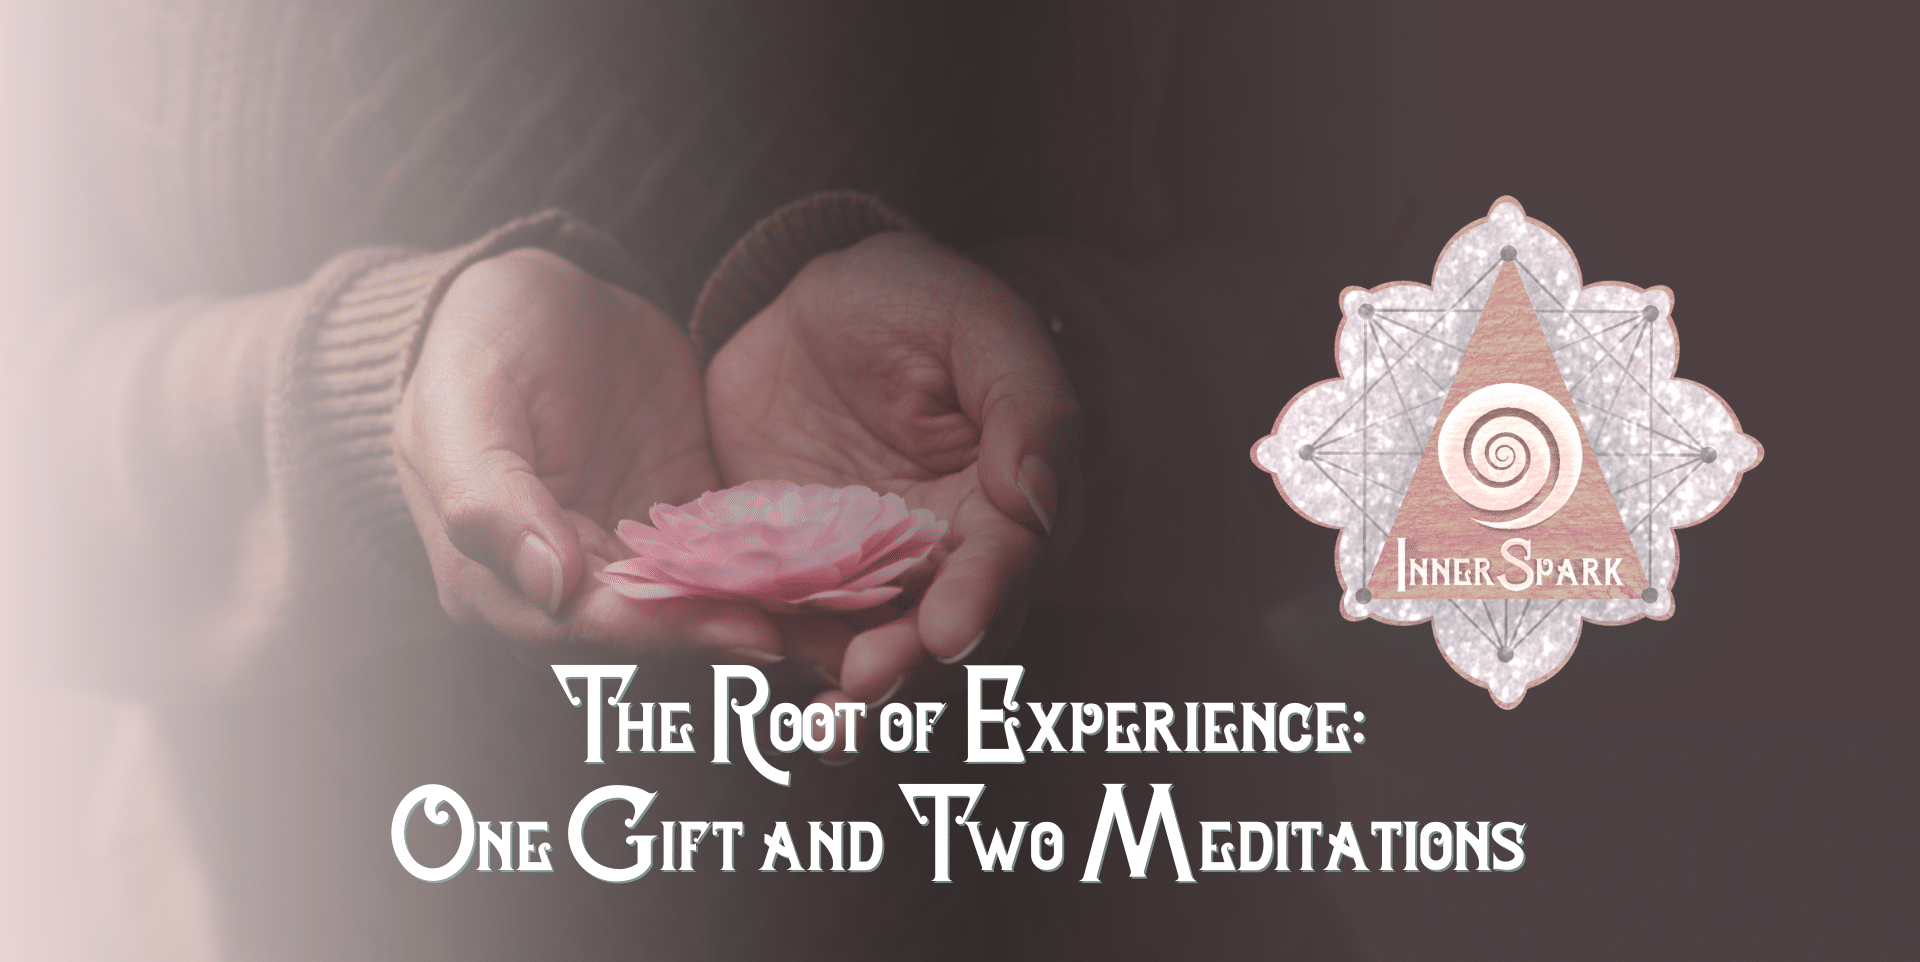 The Root of Experience: One Gift and Two Meditations